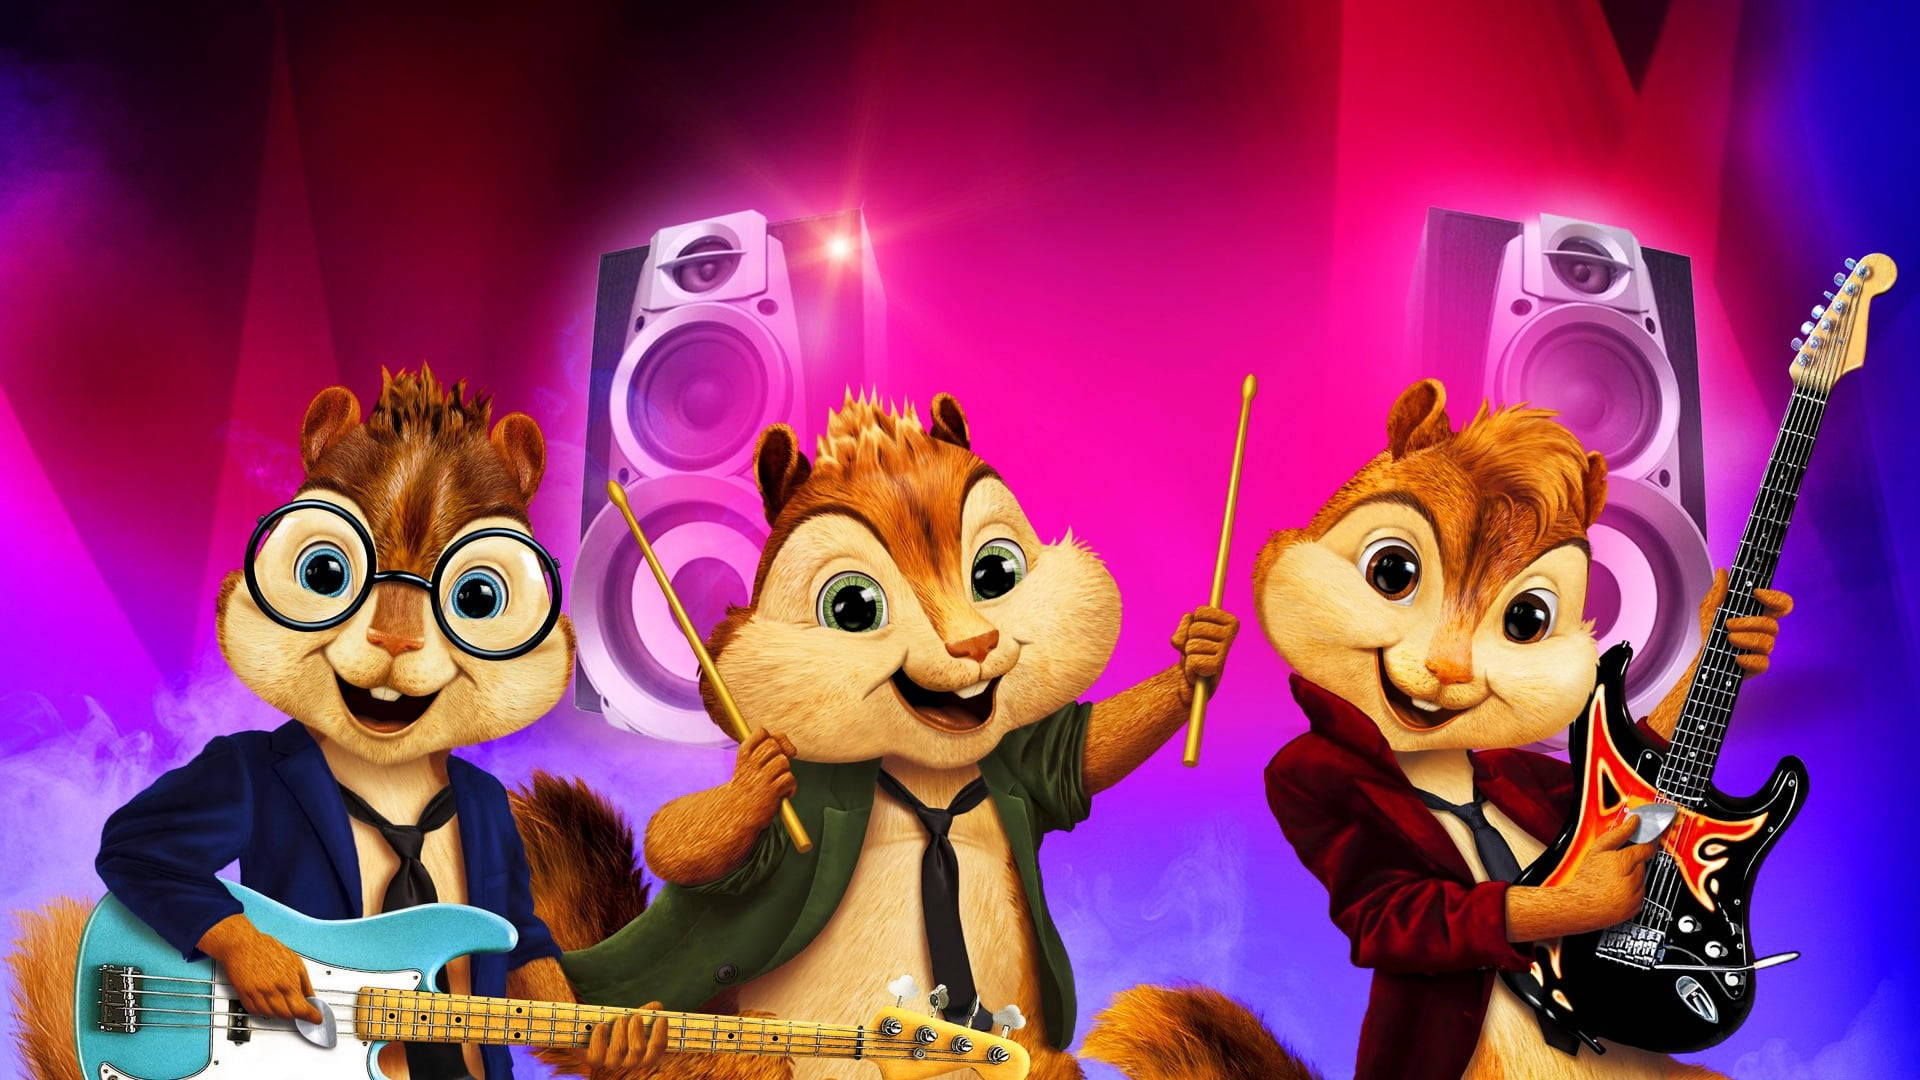 100+] Alvin And The Chipmunks Wallpapers 